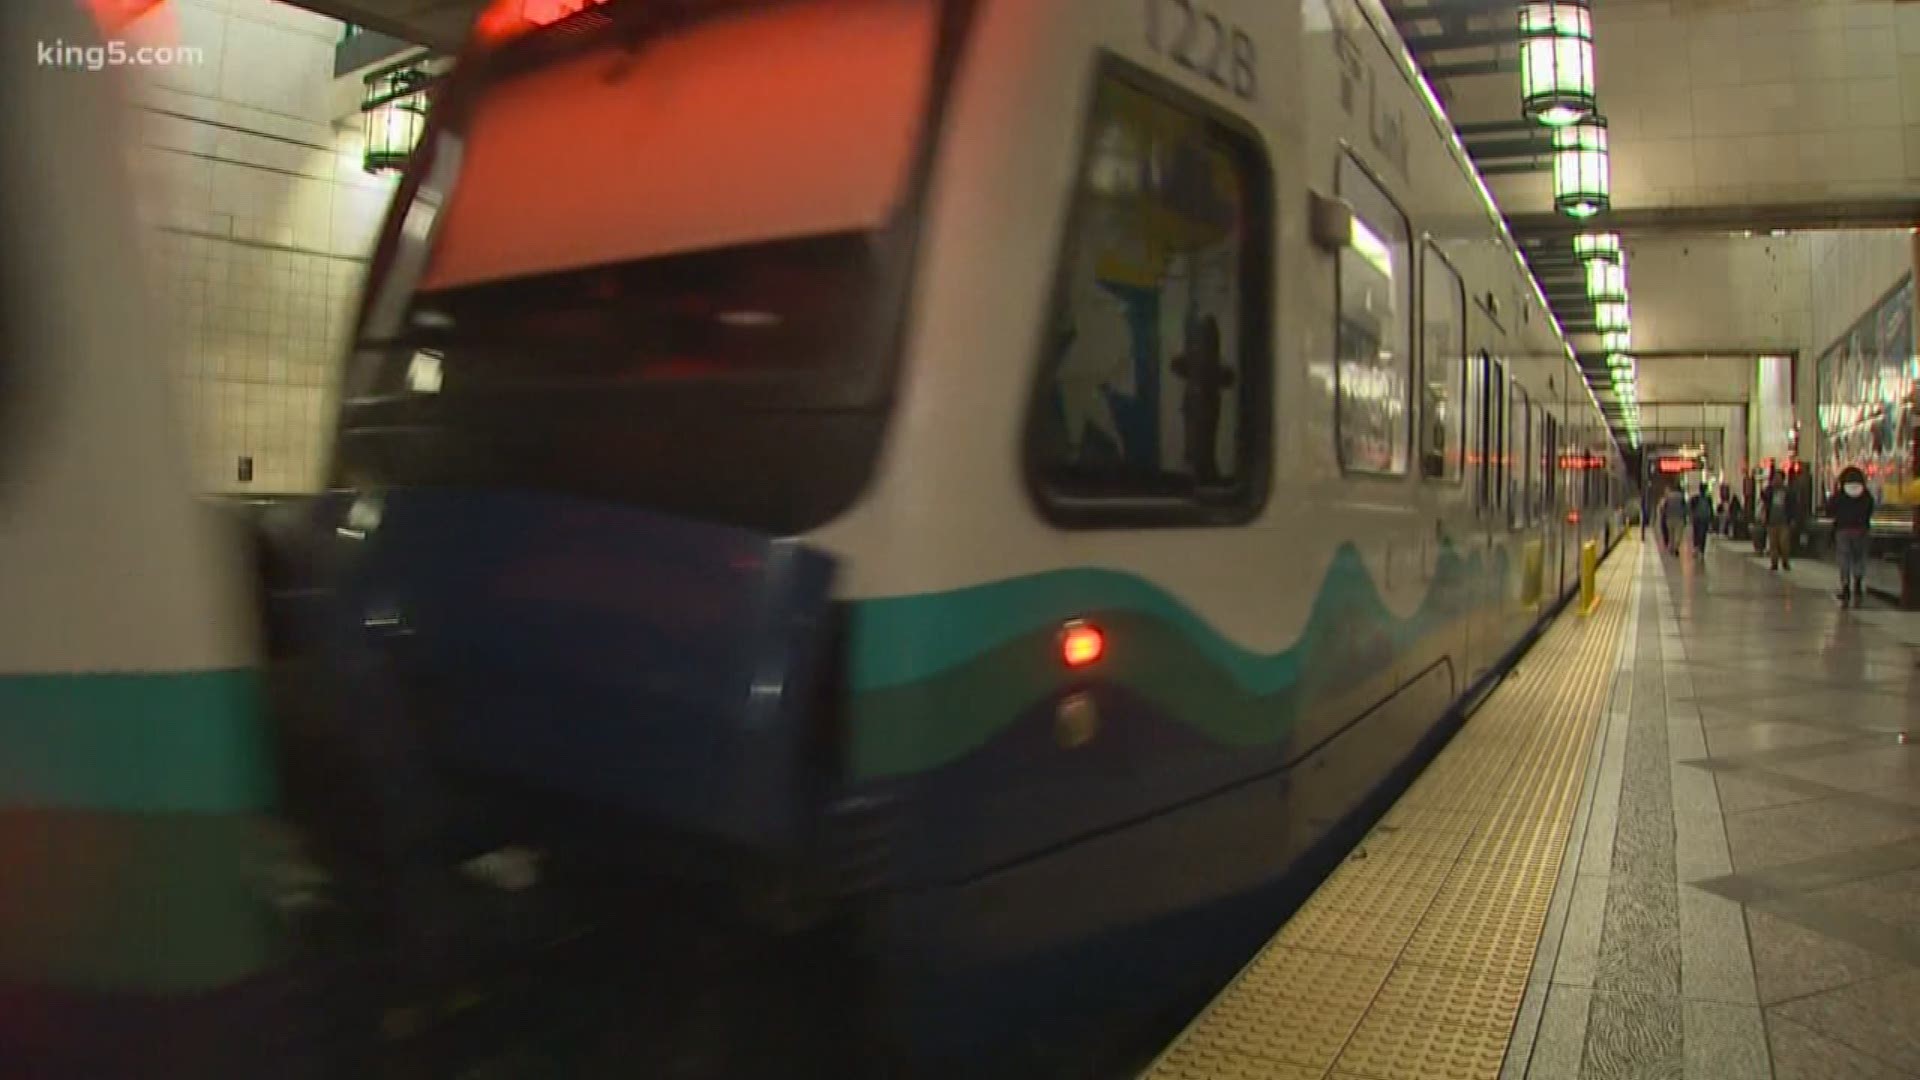 Expect to see more law enforcement and security inside several downtown Seattle light rail stations after recent violence. KING 5's Michael Crowe reports.